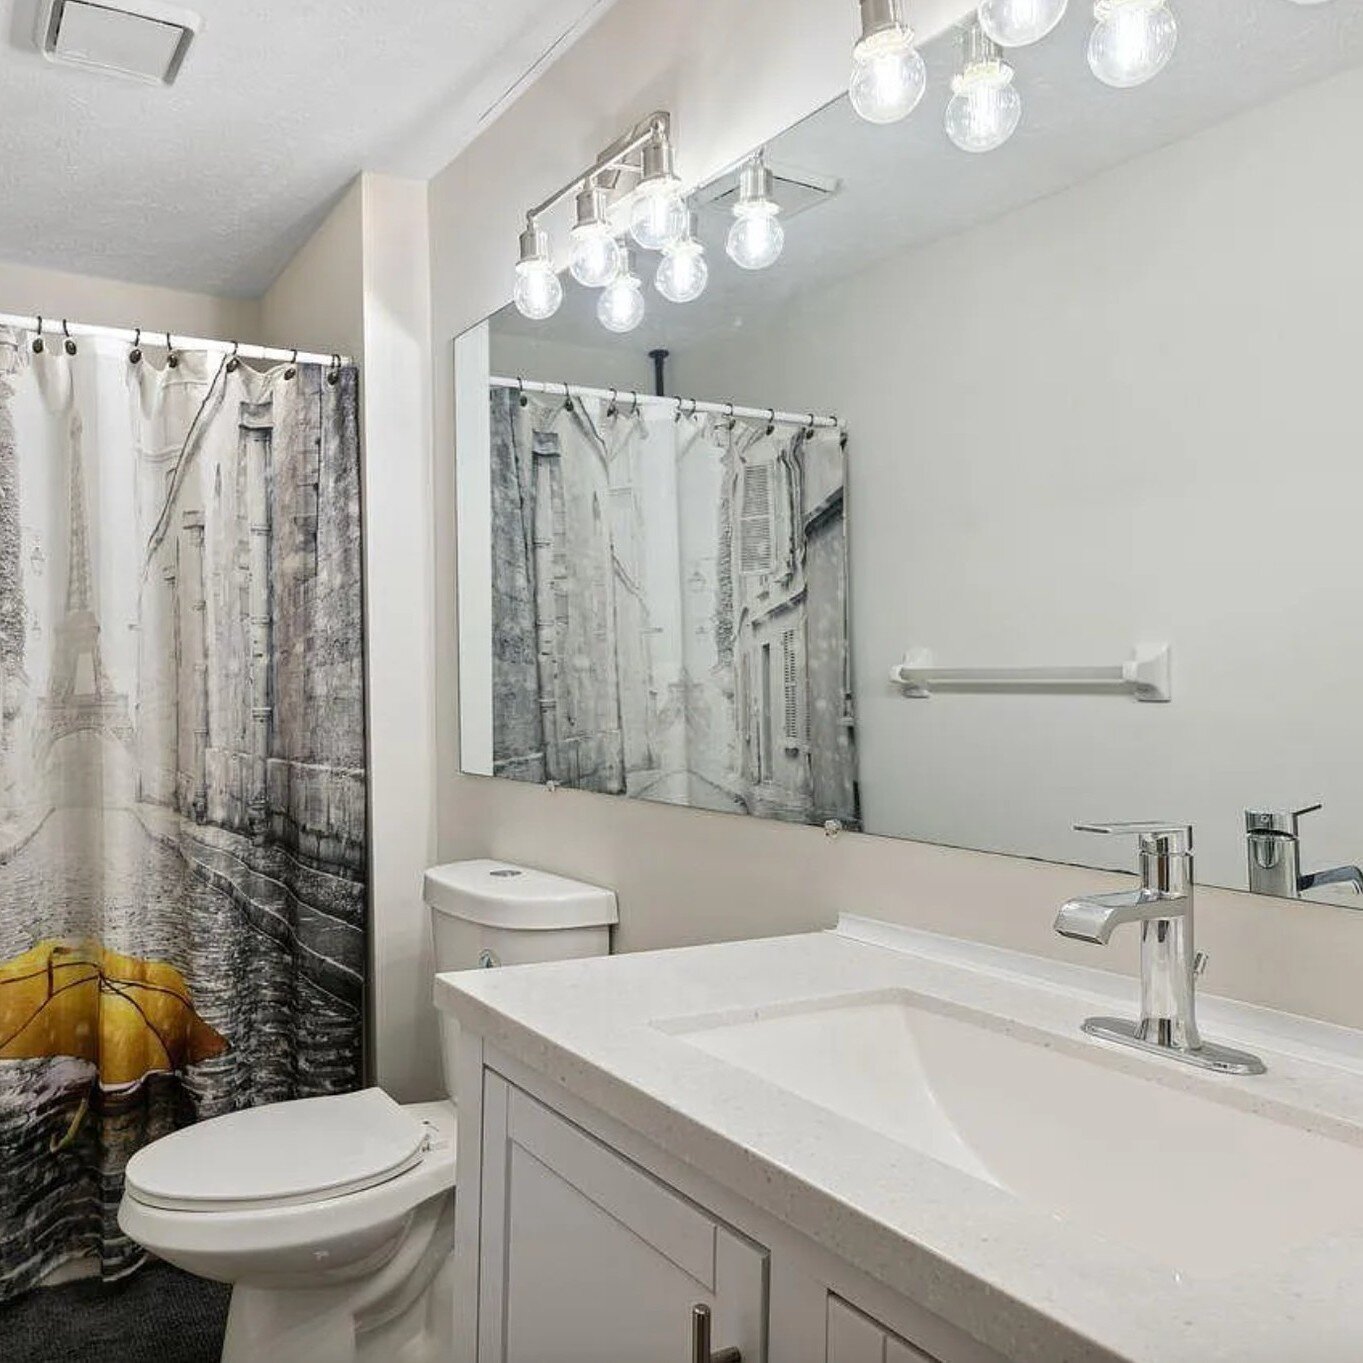 Bathroom Upgrade! 🛁✨ 
This transformation is stunning AND cost-effective. Improvements like painting, replacing a vanity, and installing new lighting are great choices for adding value to the bathroom without breaking the bank.

#homeimprovementtips